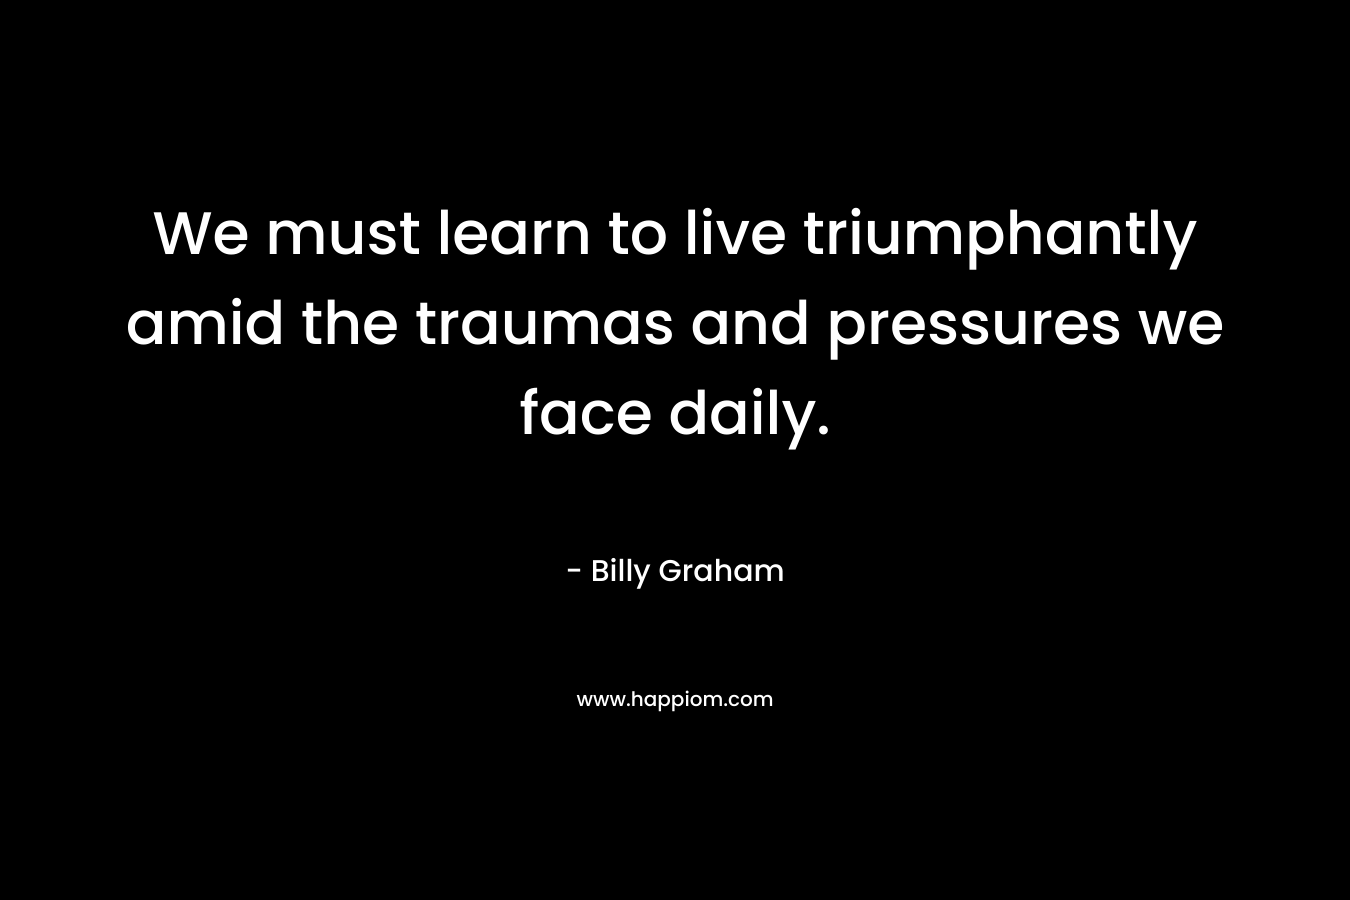 We must learn to live triumphantly amid the traumas and pressures we face daily. – Billy Graham